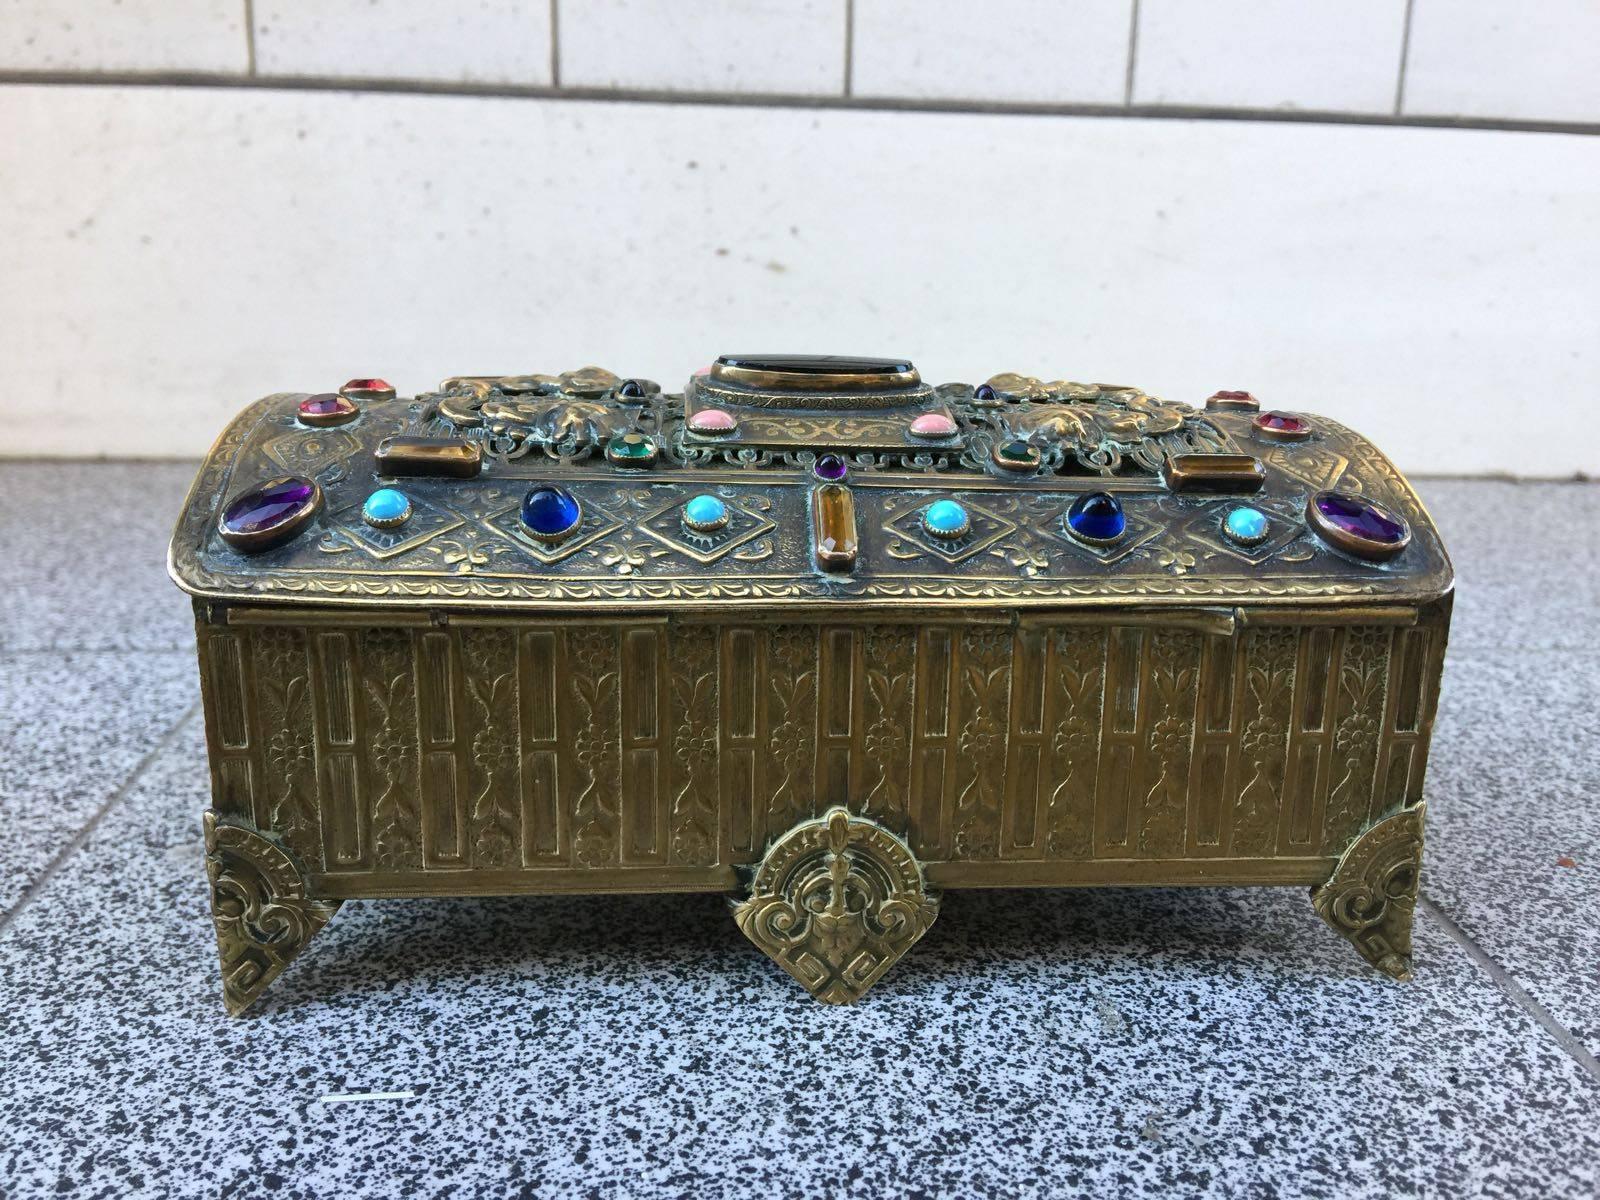 An exceptional 19th century brass box from Paris with large onyx in the middle, citrine, coral, garnets, turquoise, sapphires and green garnets.